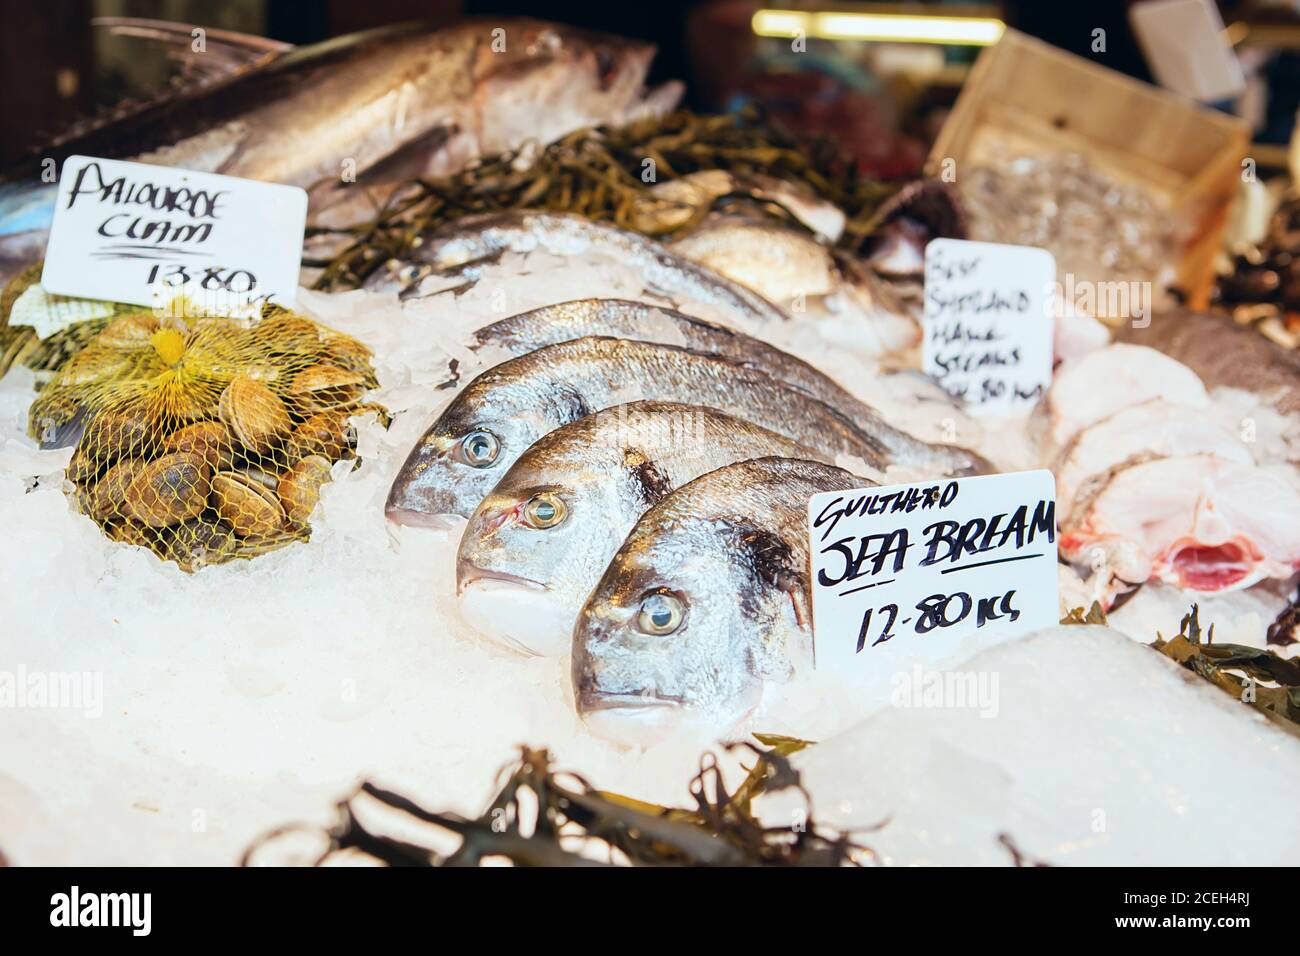 Freshly caught Sea Bream fishes and other seafood on display at Borough Market in London, UK. Sparidae, Pagrus major, Ch'amdom and Pagellus bogaraveo. Stock Photo